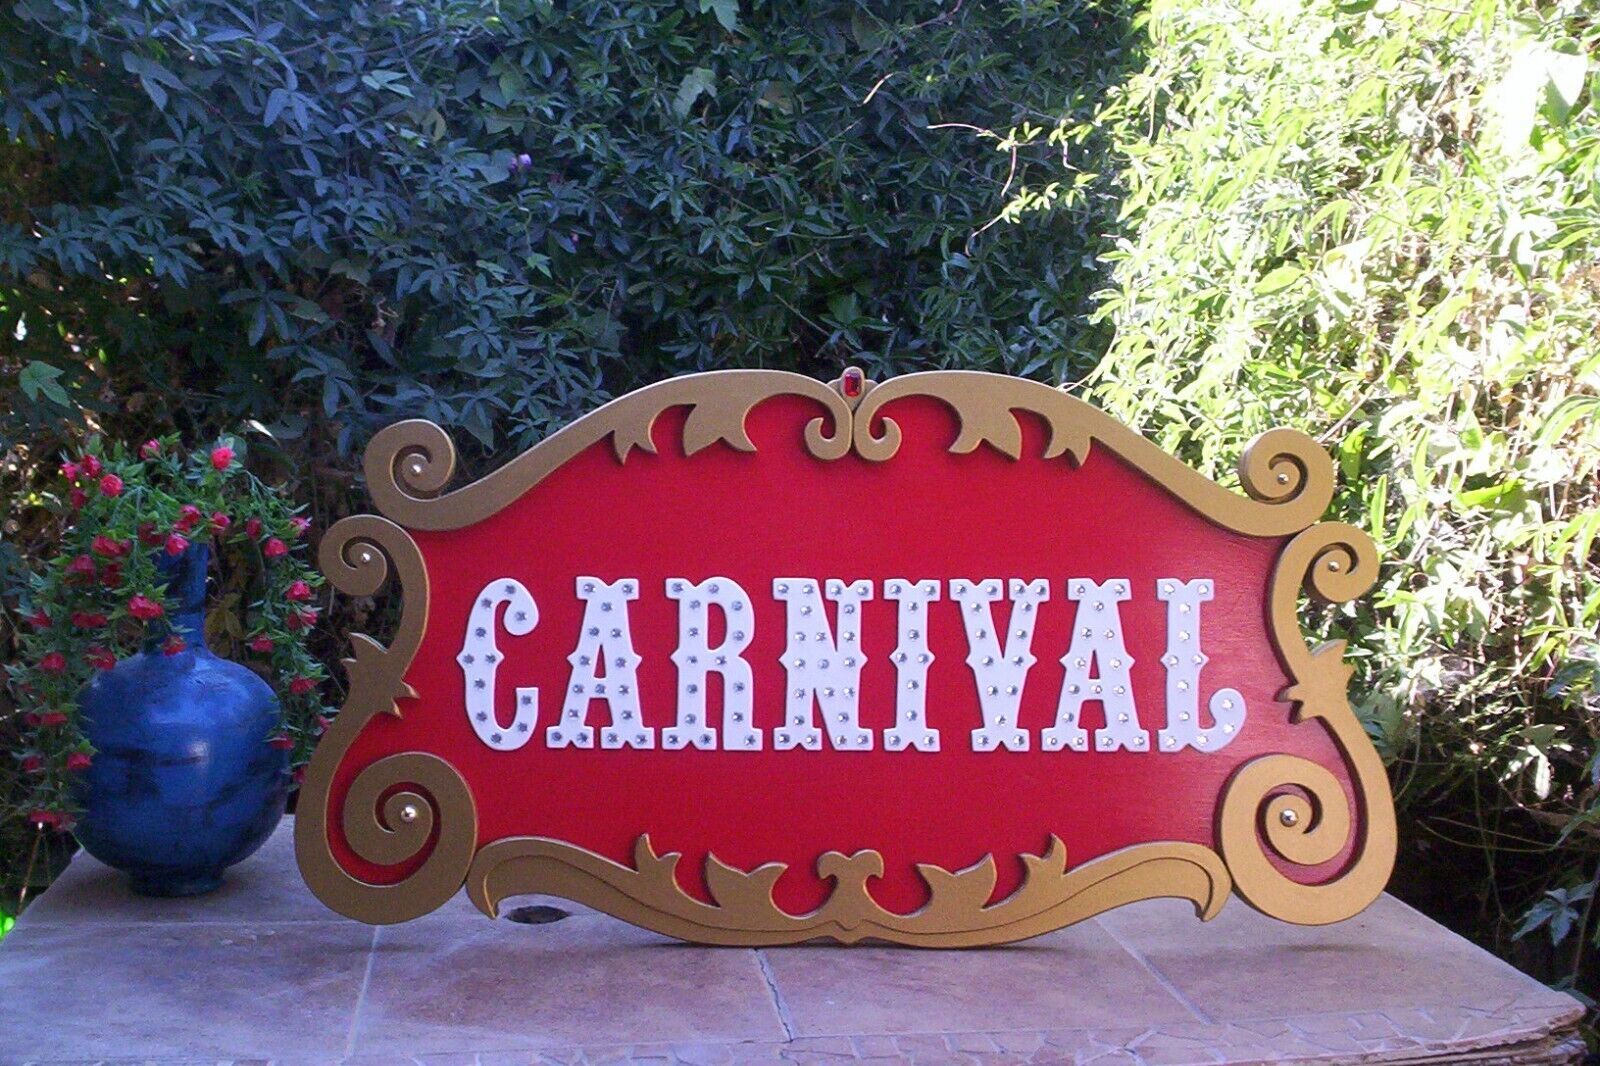 Beautiful hand crafted carnival sign